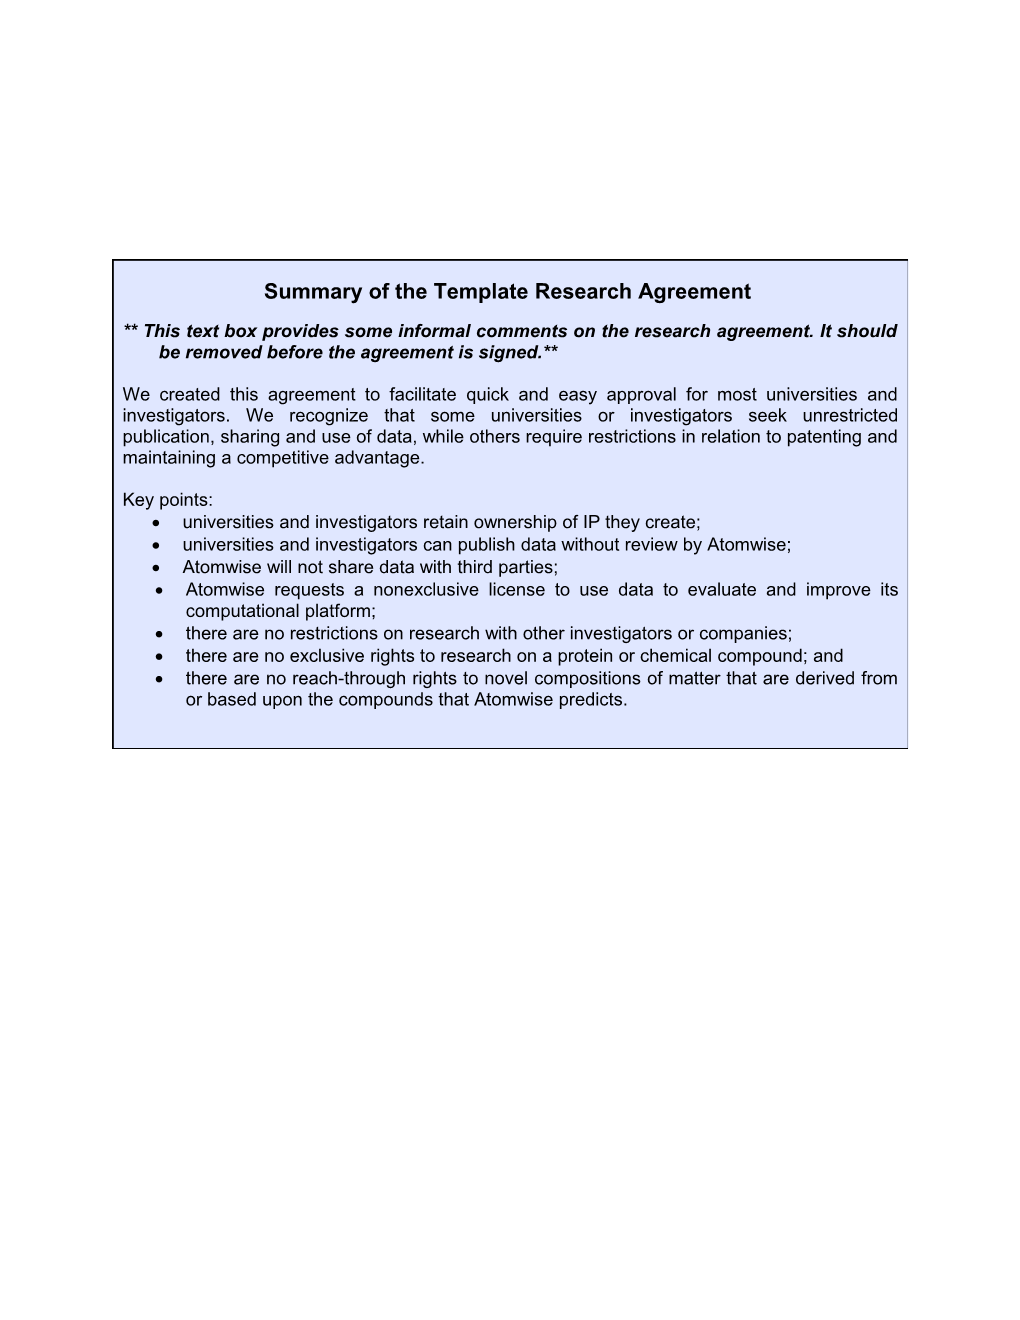 Summary of the Template Research Agreement